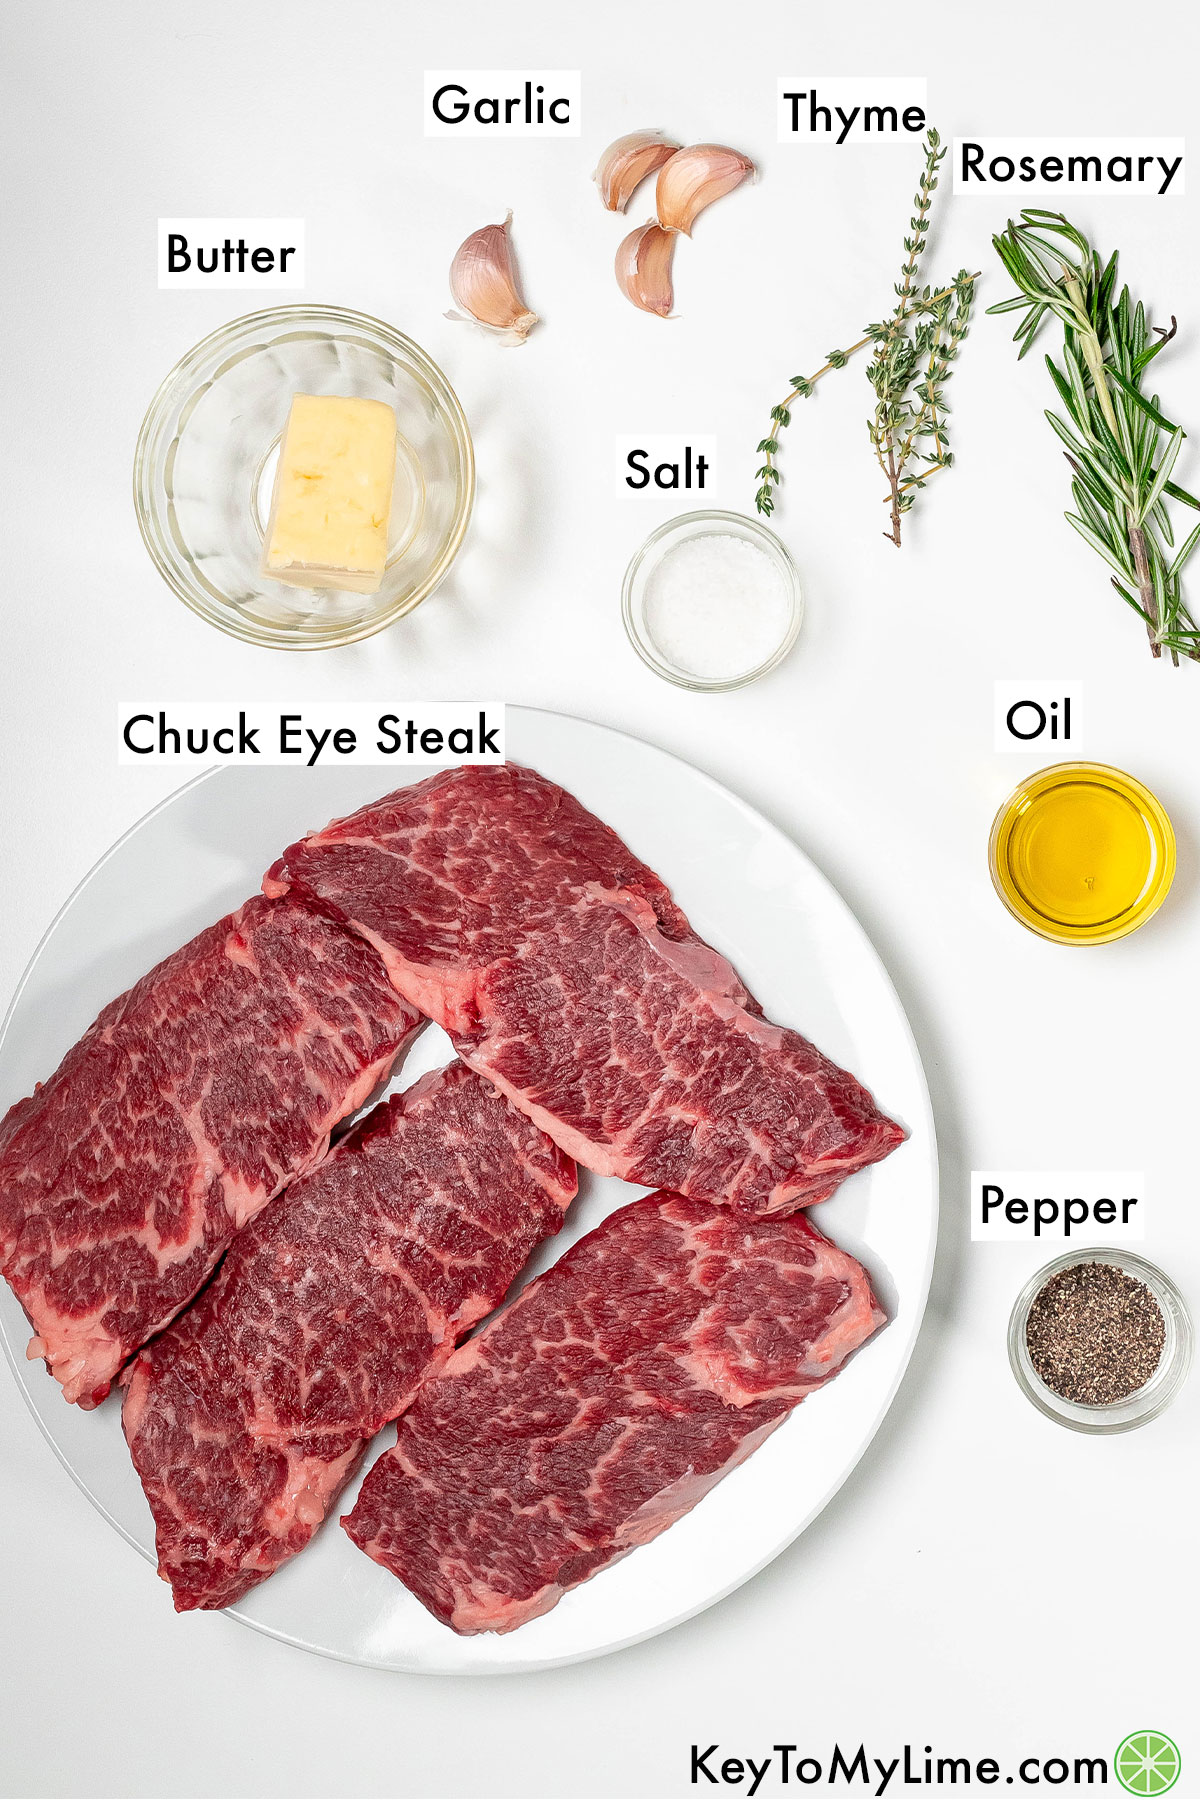 The labeled ingredients for chuck eye steak.